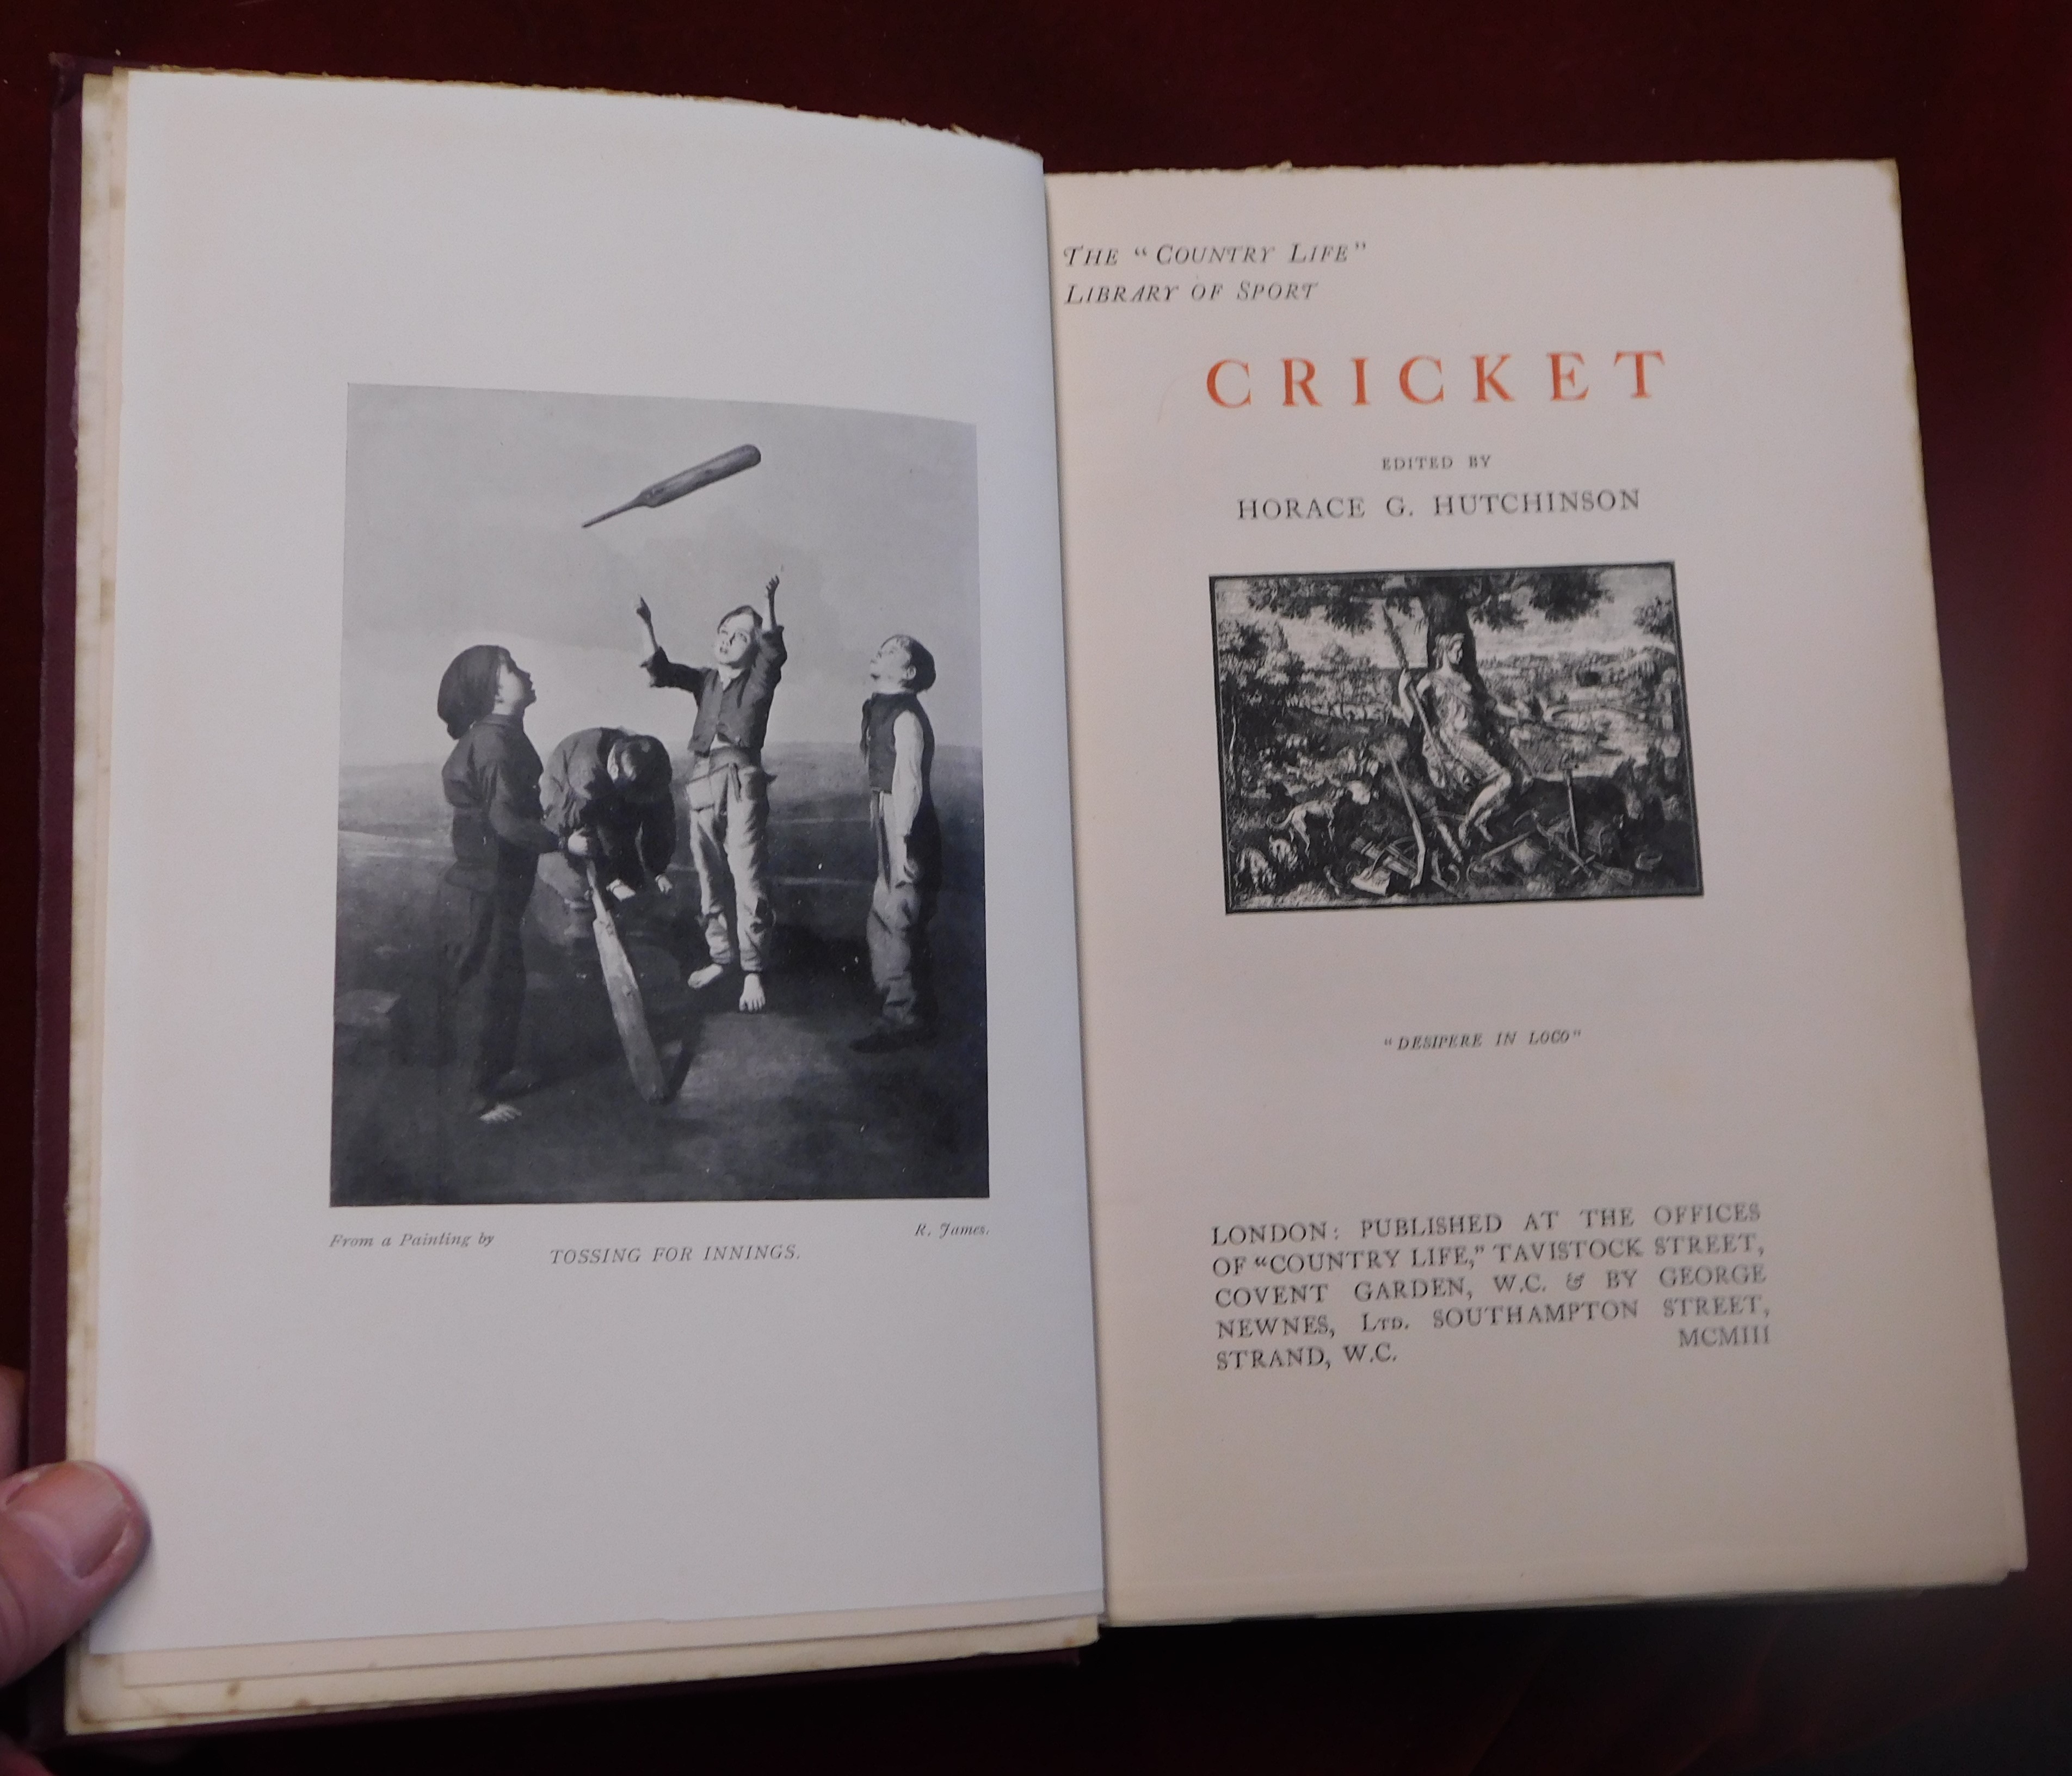 Cricket - 'Country Life' Library of sport, pub Newness 1907 (M/B), well illustrated some foxing to - Image 10 of 10